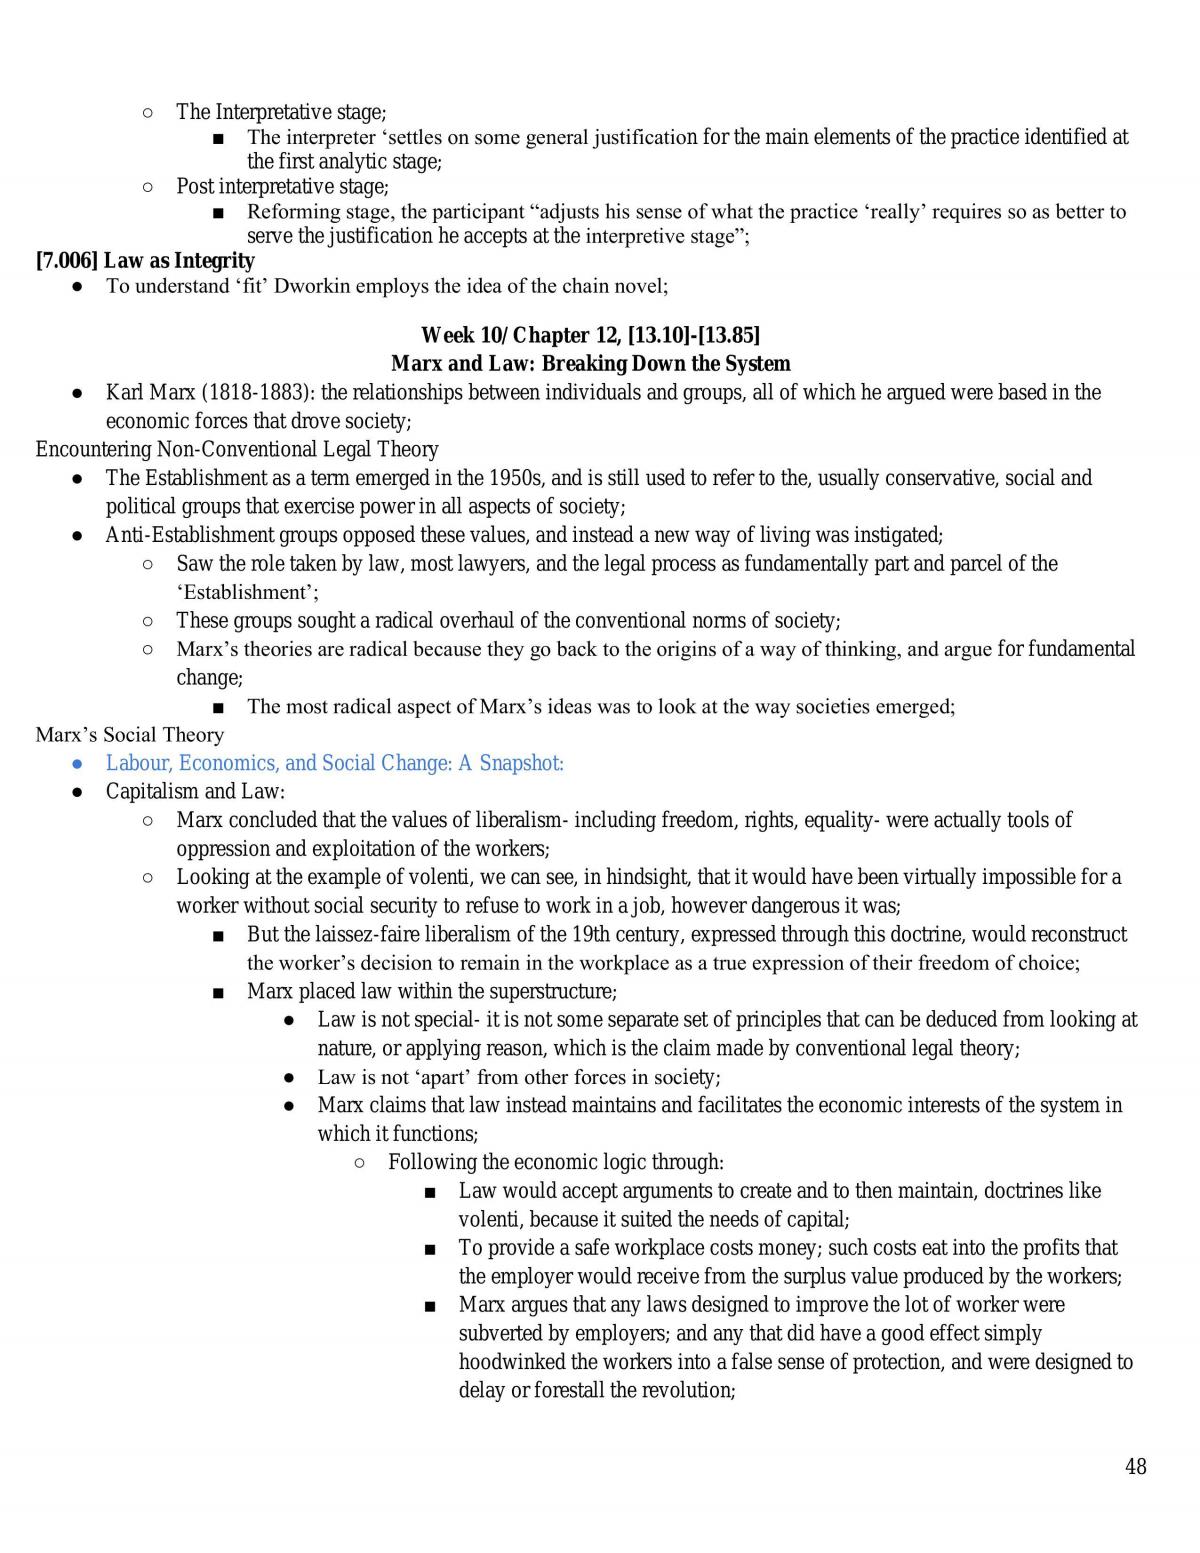 Legal Theory- Complete Summary  - Page 48